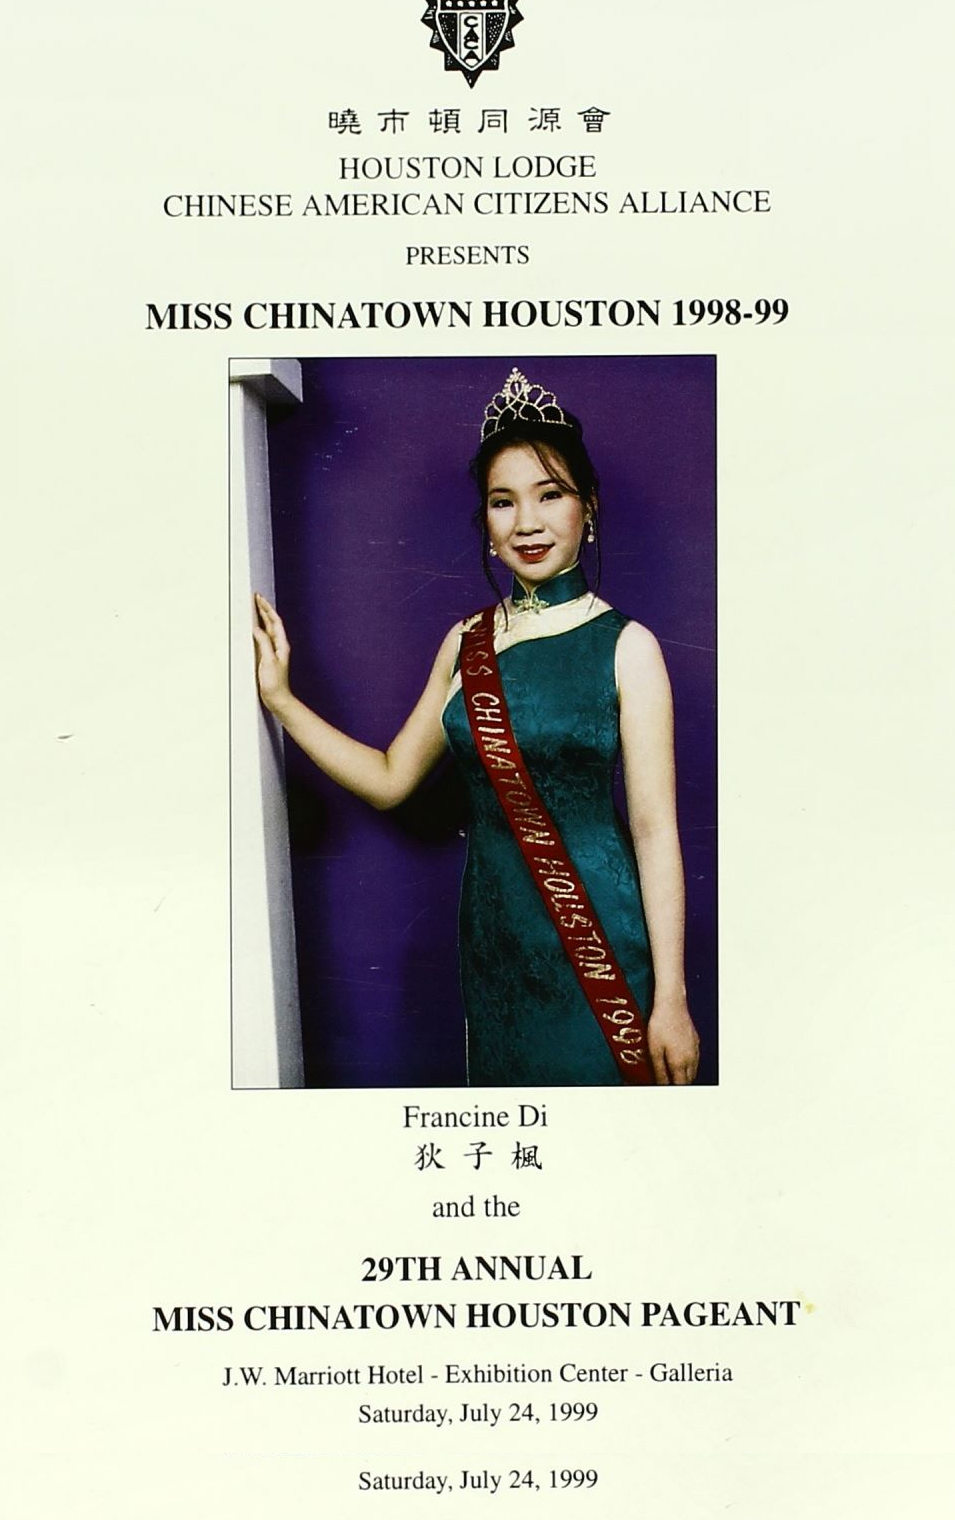 Francine Di poses in formal with her sash and crown from the Miss Chinatown Houston Pageant 1998-99